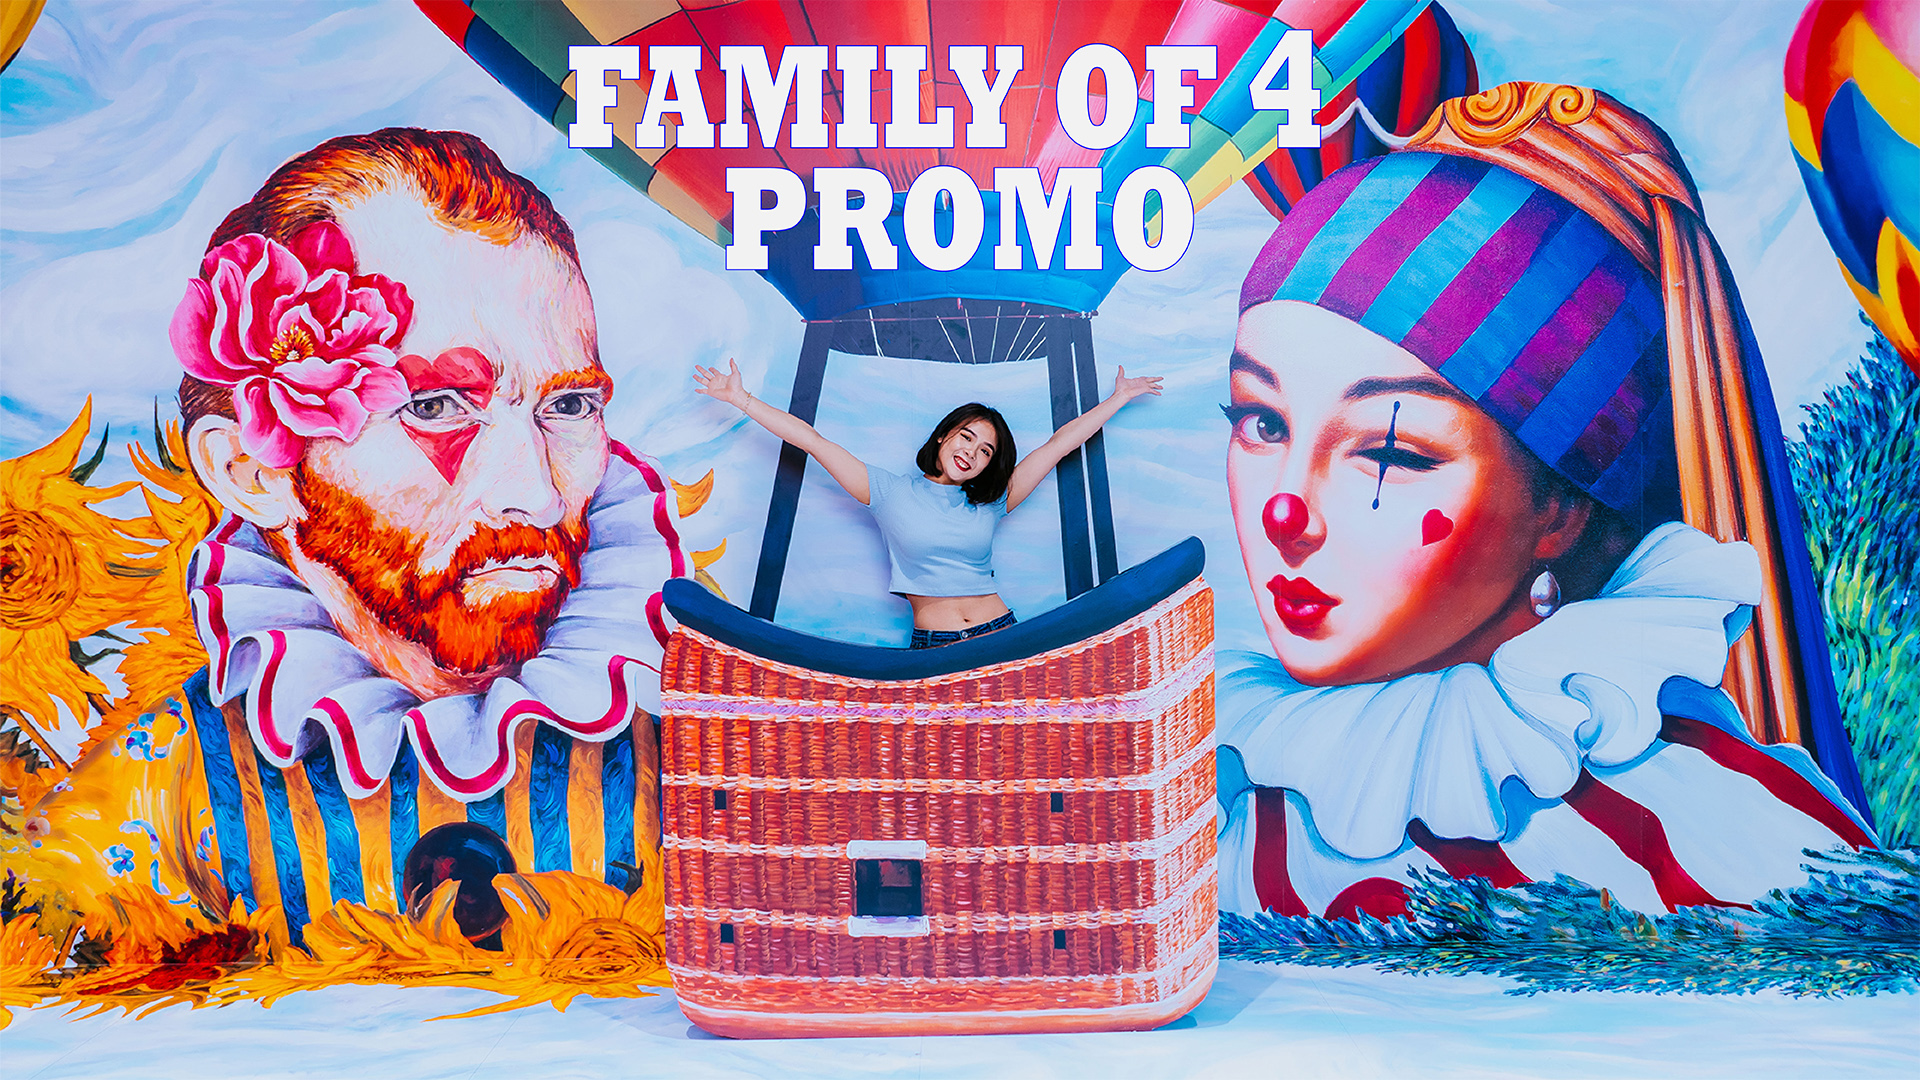 PROMO: Family of 4 [2 Adults + 2 Children] - 25% off Admission Tickets